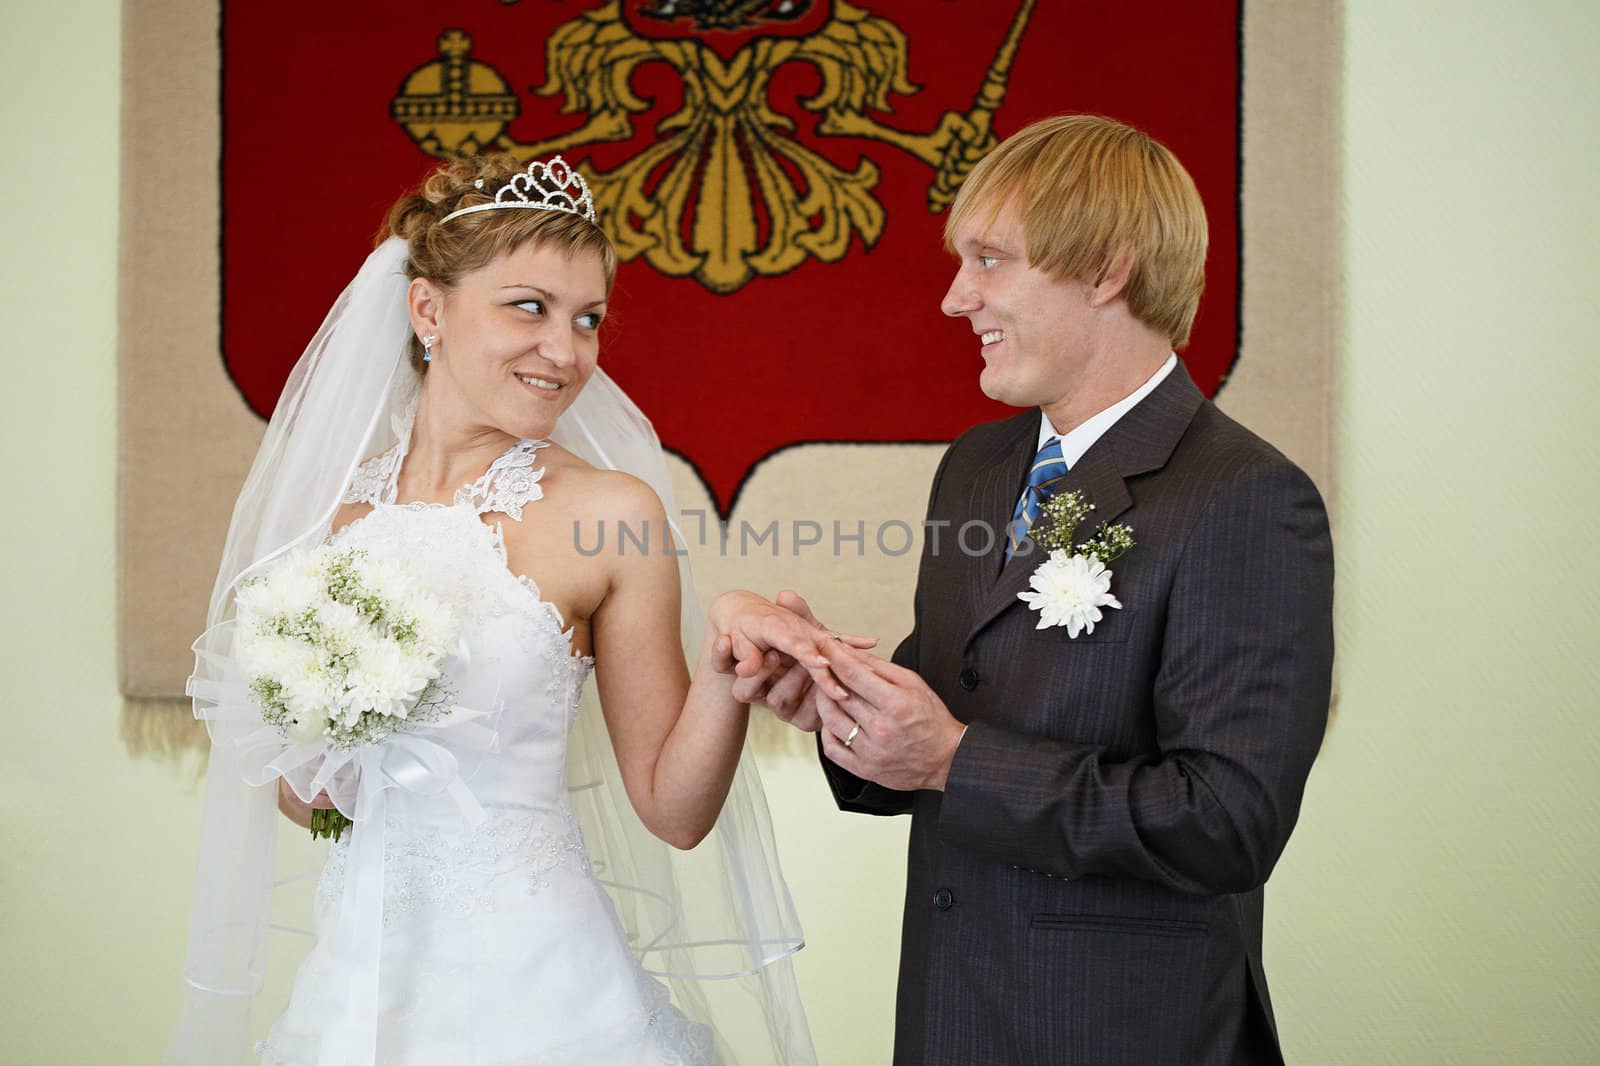 The bride and groom exchange rings on the background of the national coat of arms